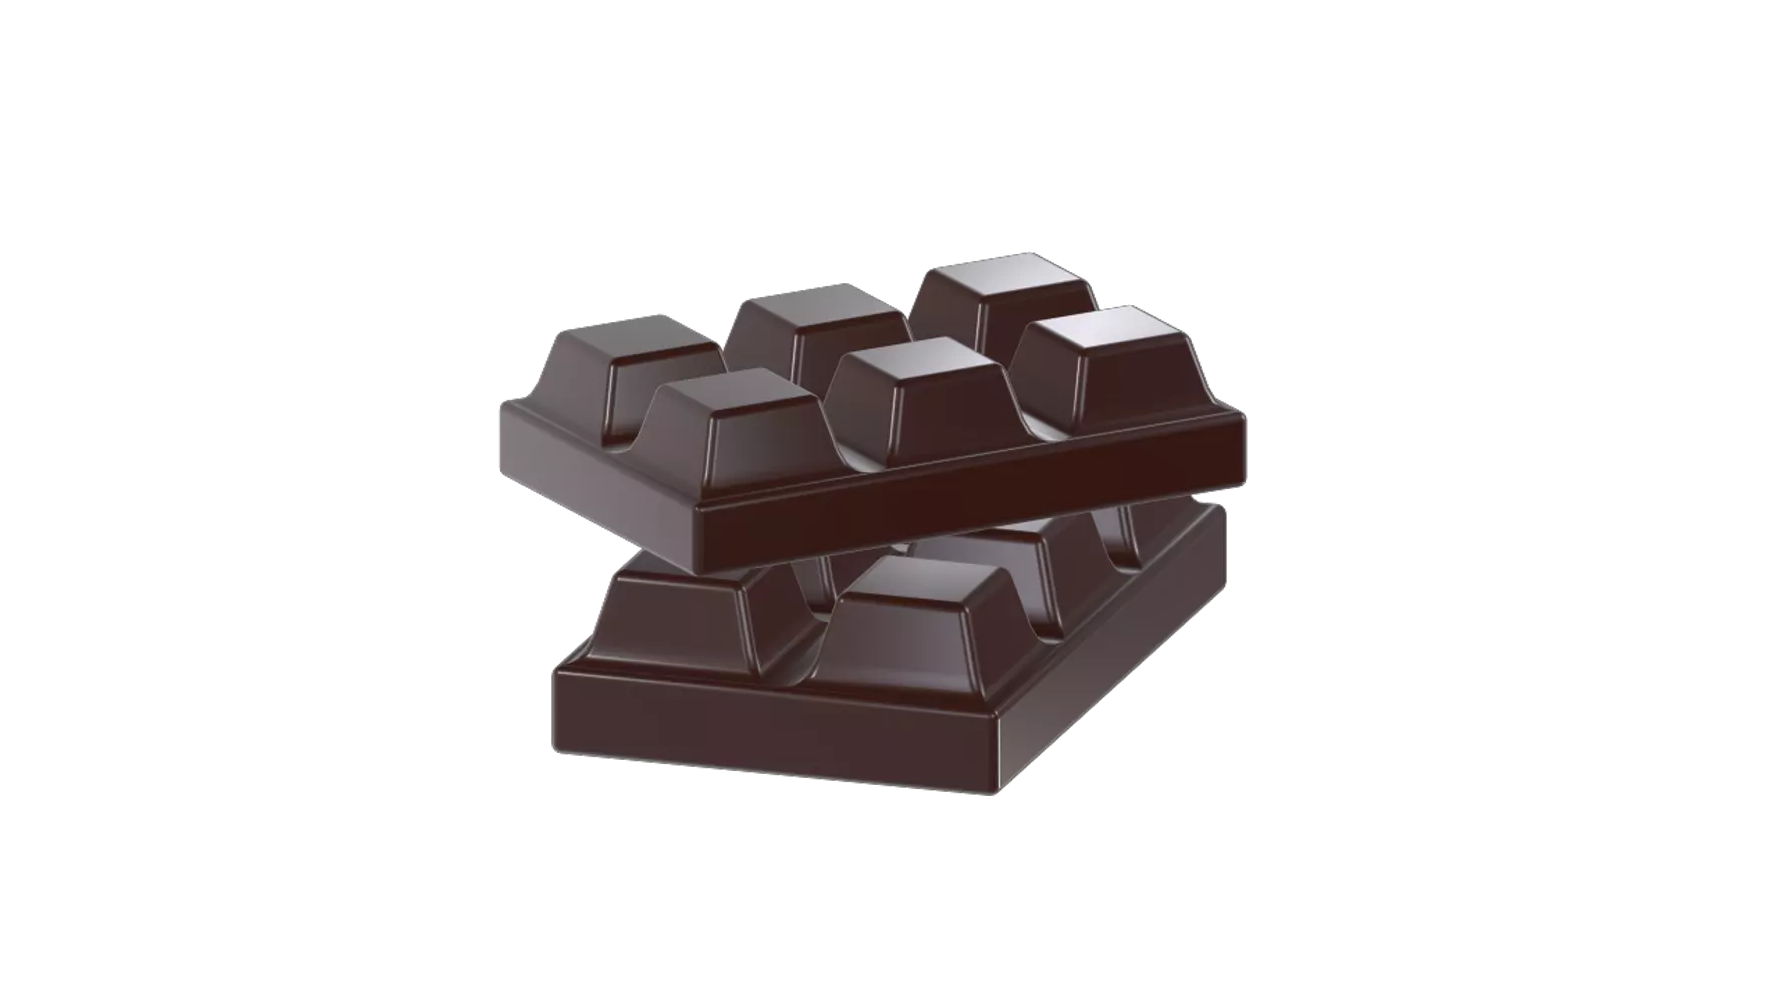 Two Chocolate Bar 3d model--4be66010-c086-4241-ab67-7e01c37273ae